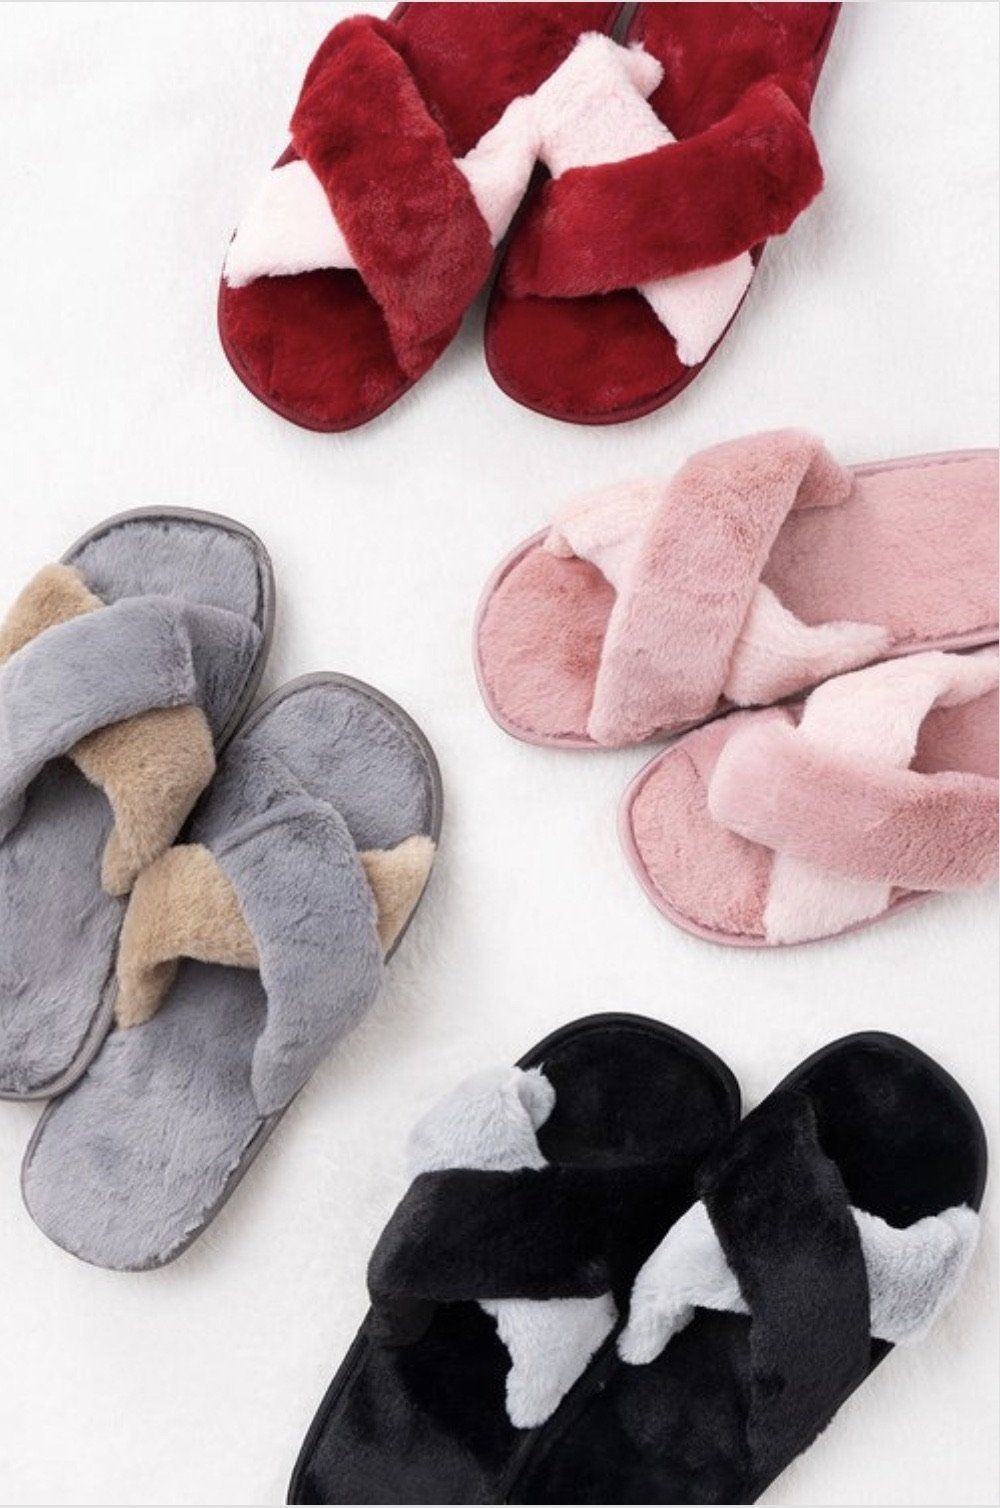 daily wear slippers for ladies